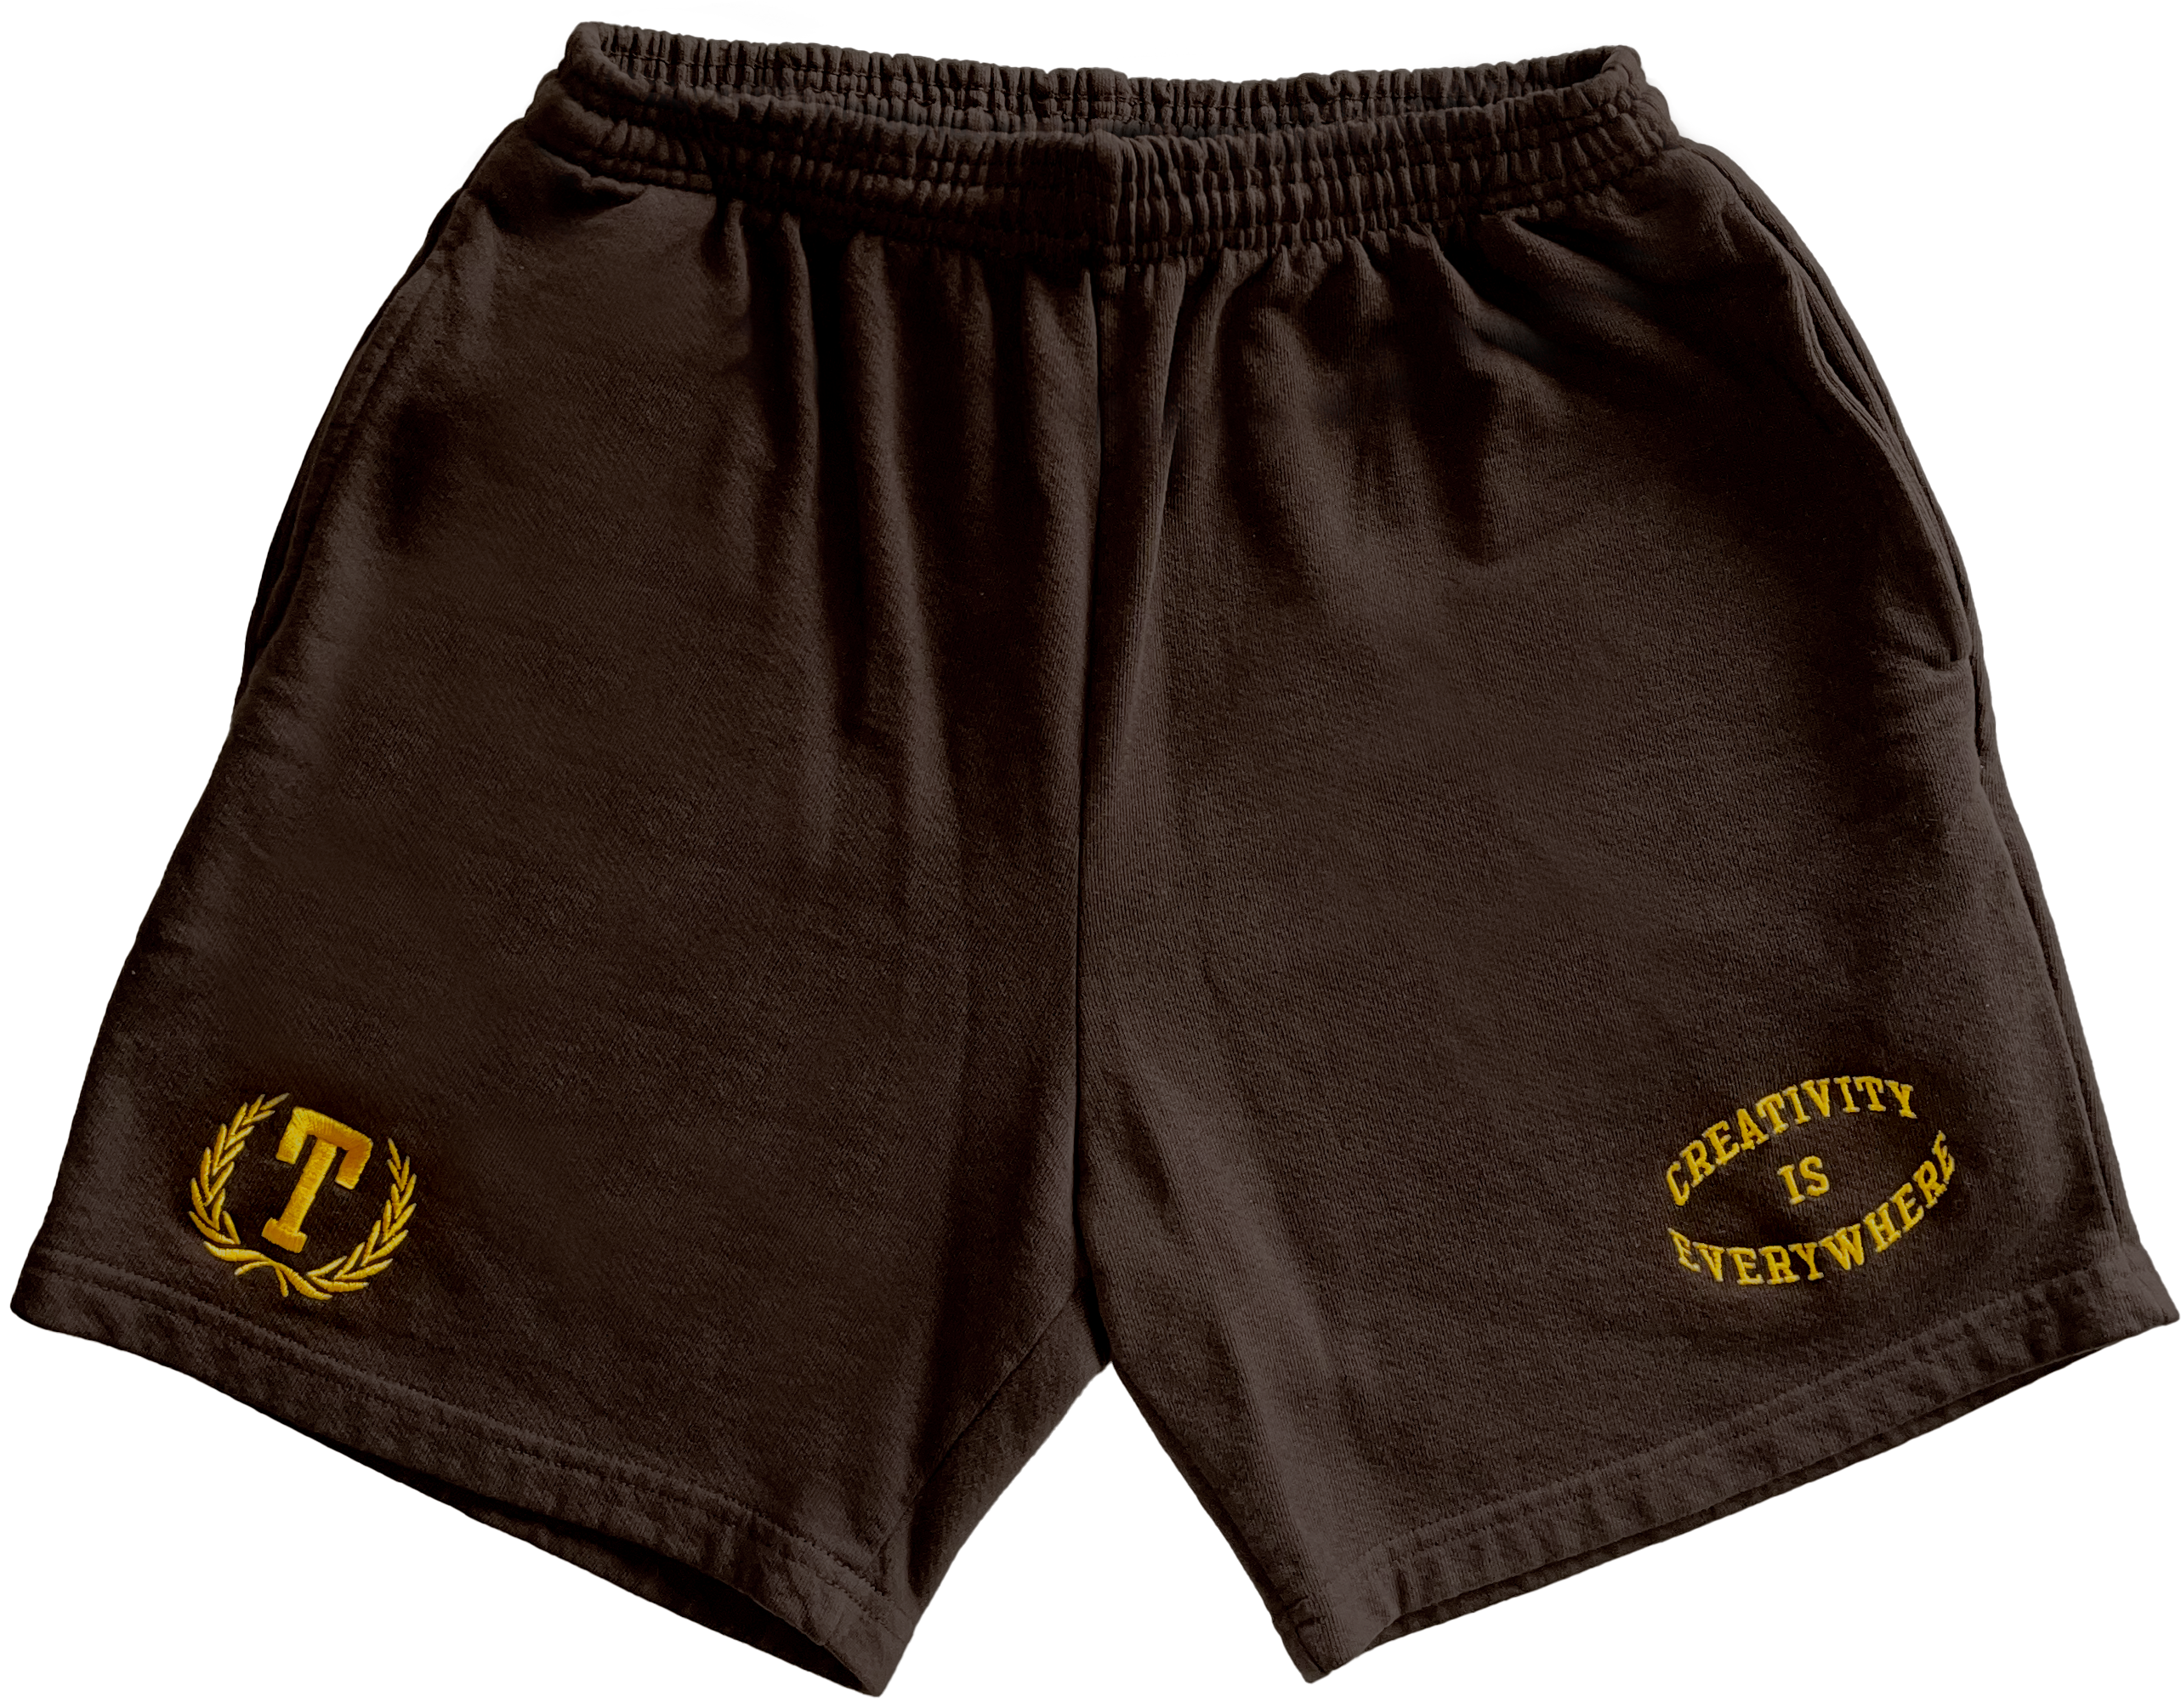 'TOWN' Creativity Is Everywhere Shorts in Brown